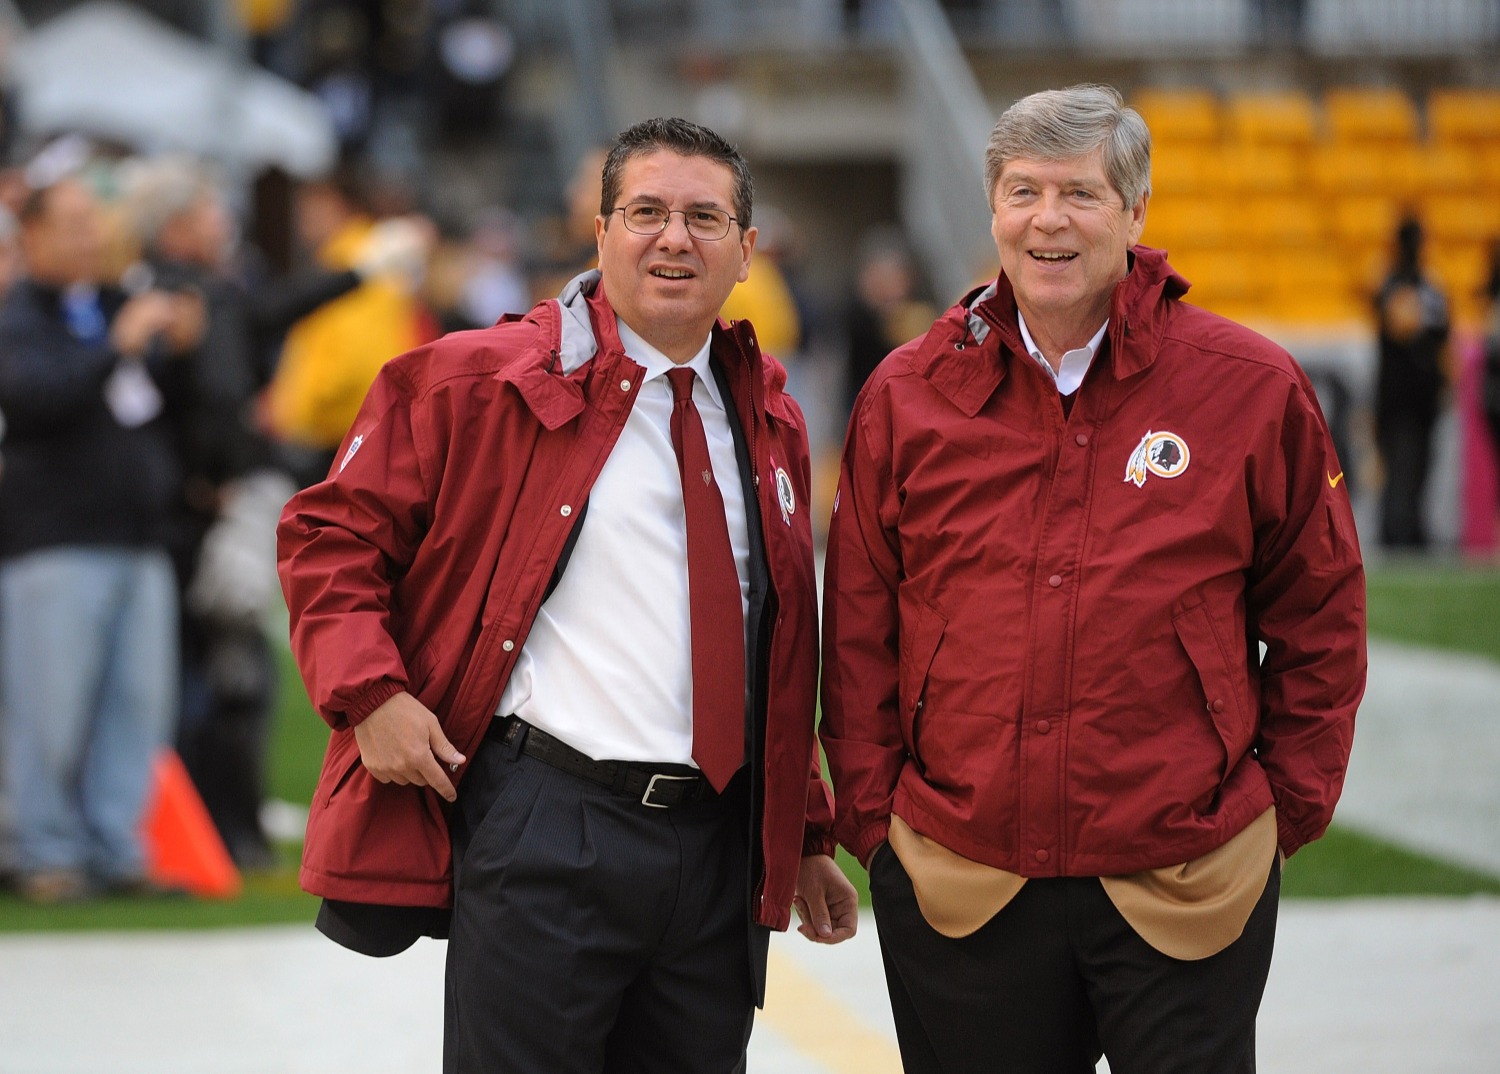 Dan Snyder is facing pressure from Washington Football Team minority owners to sell his team.